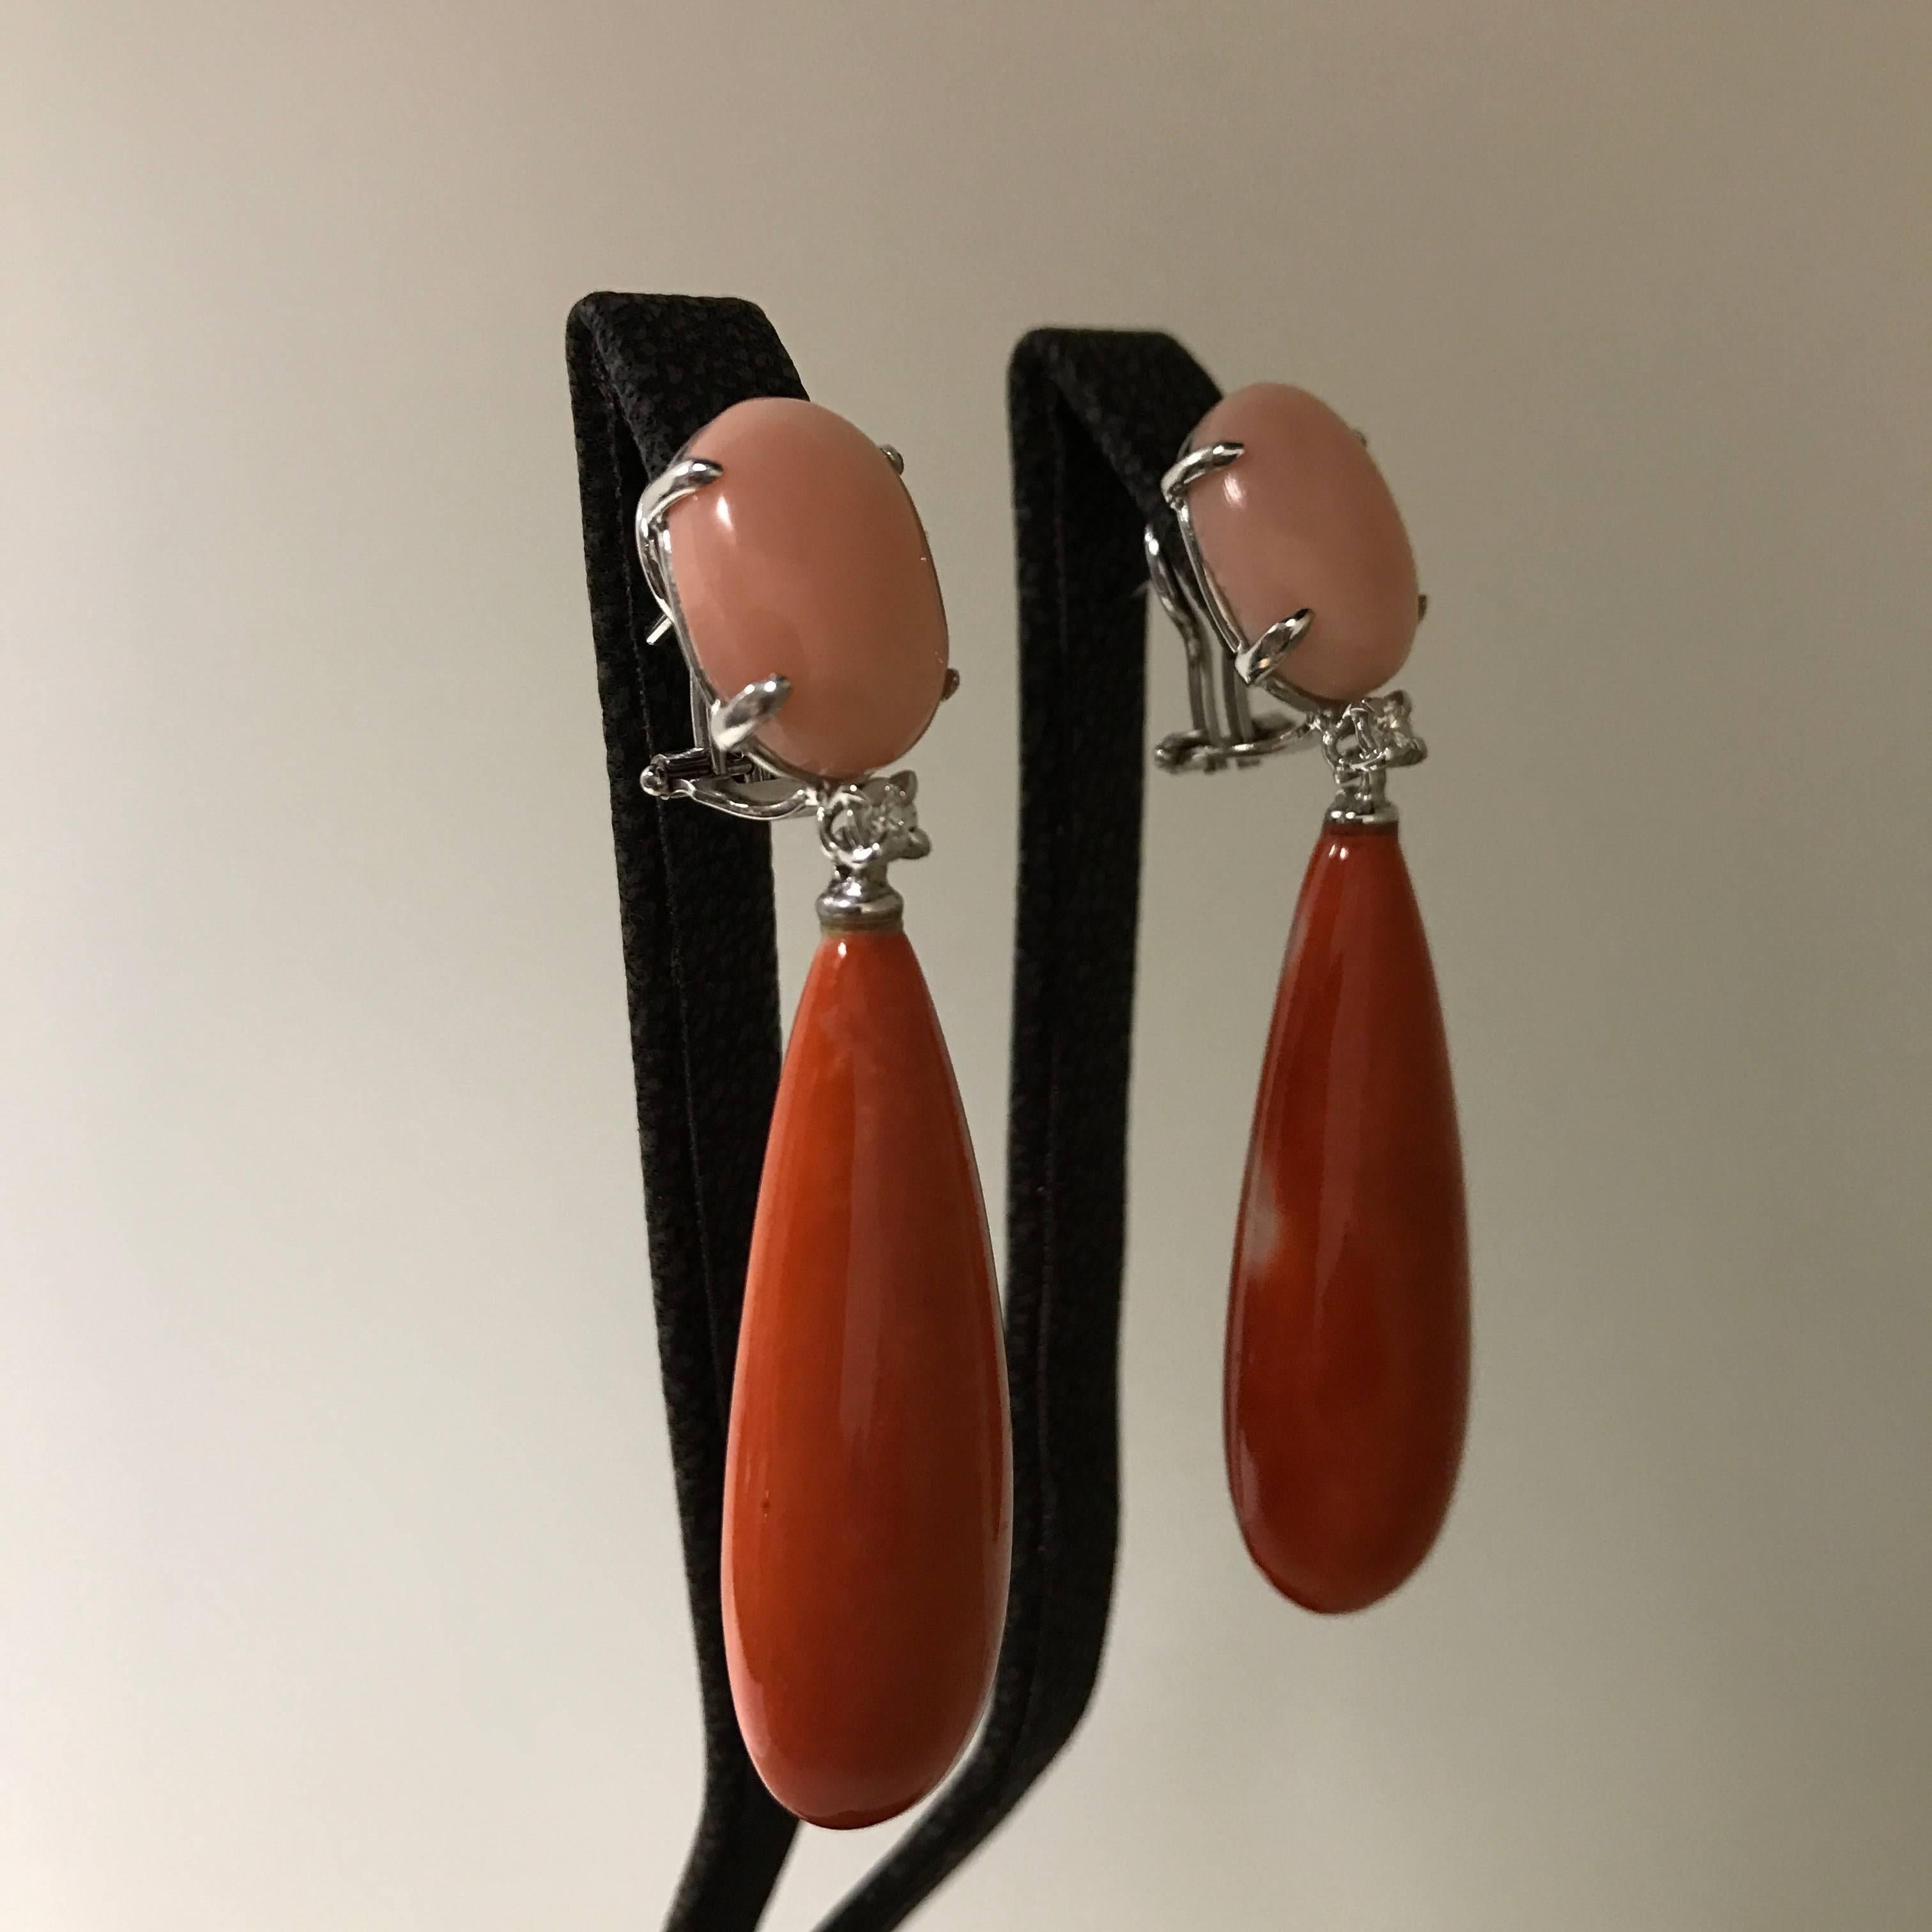 Coral Diamonds White Gold 18 Carat Articulated Earrings
Clasp with clip and/or post
White Gold 18 carat,
2 drops of red coral 
2 pastilles of peach coral 
2 diamonds 0,10 carat